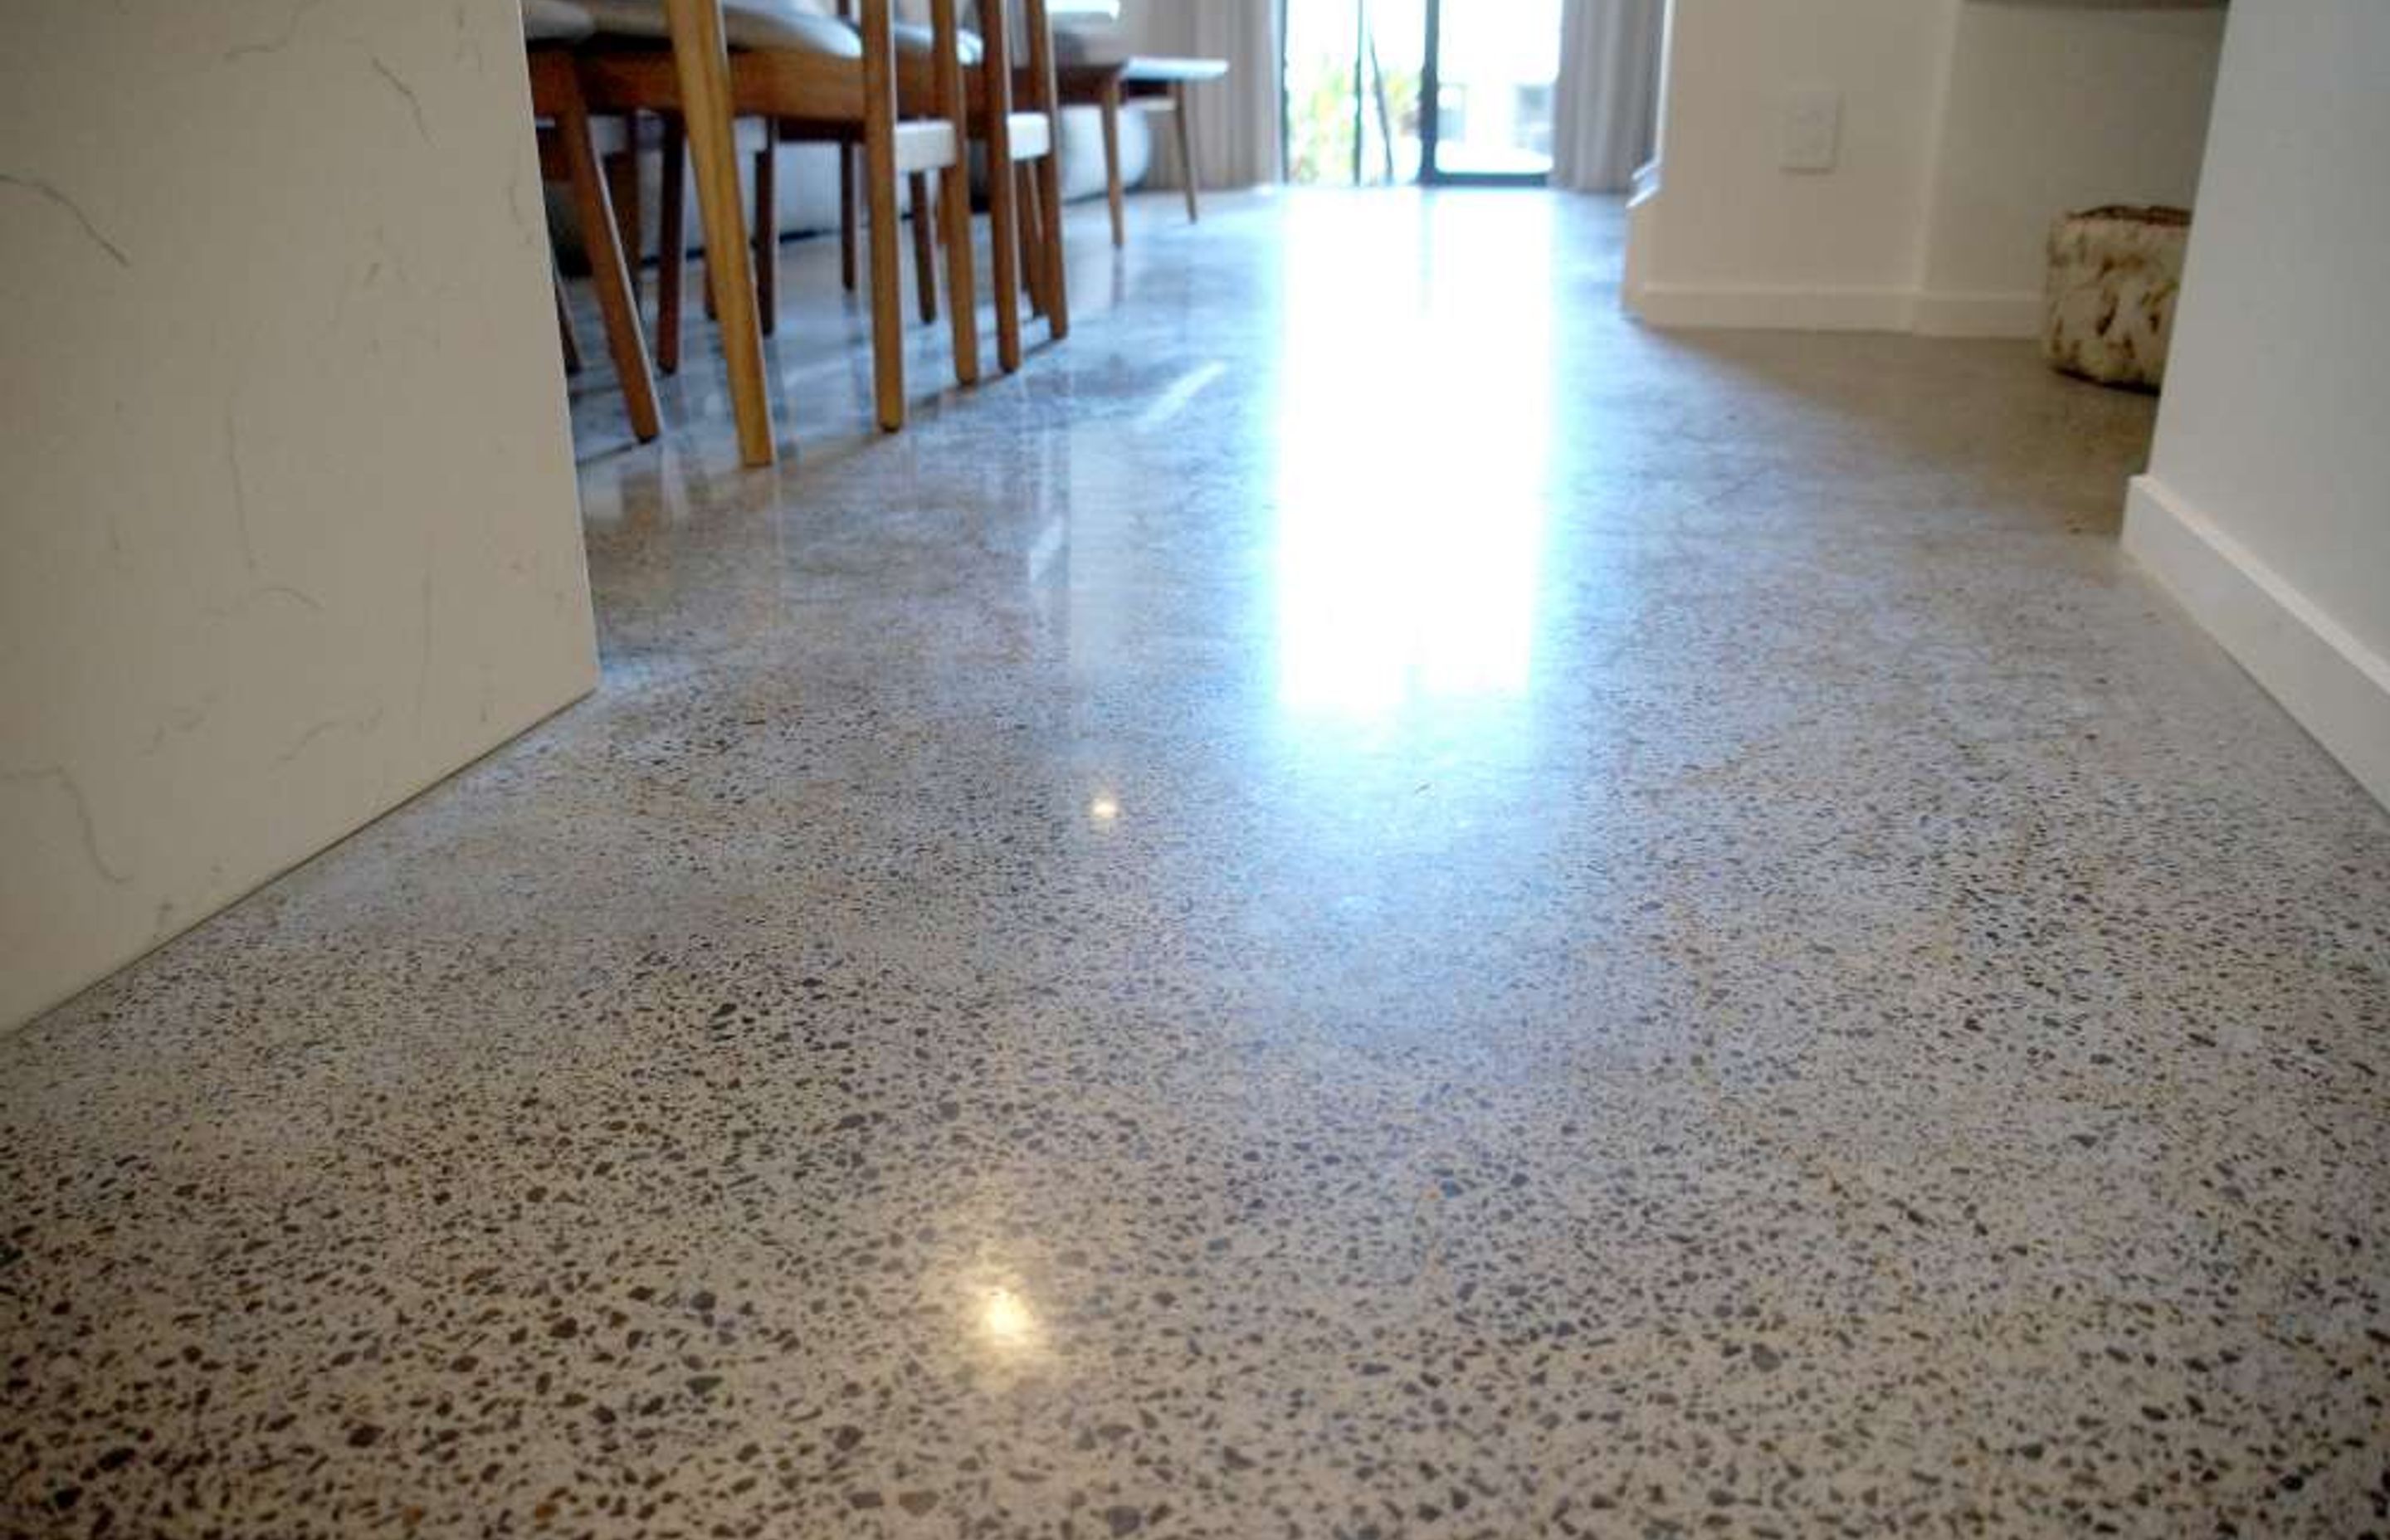 Poured concrete floor was chosen for this kitchen in Parnell